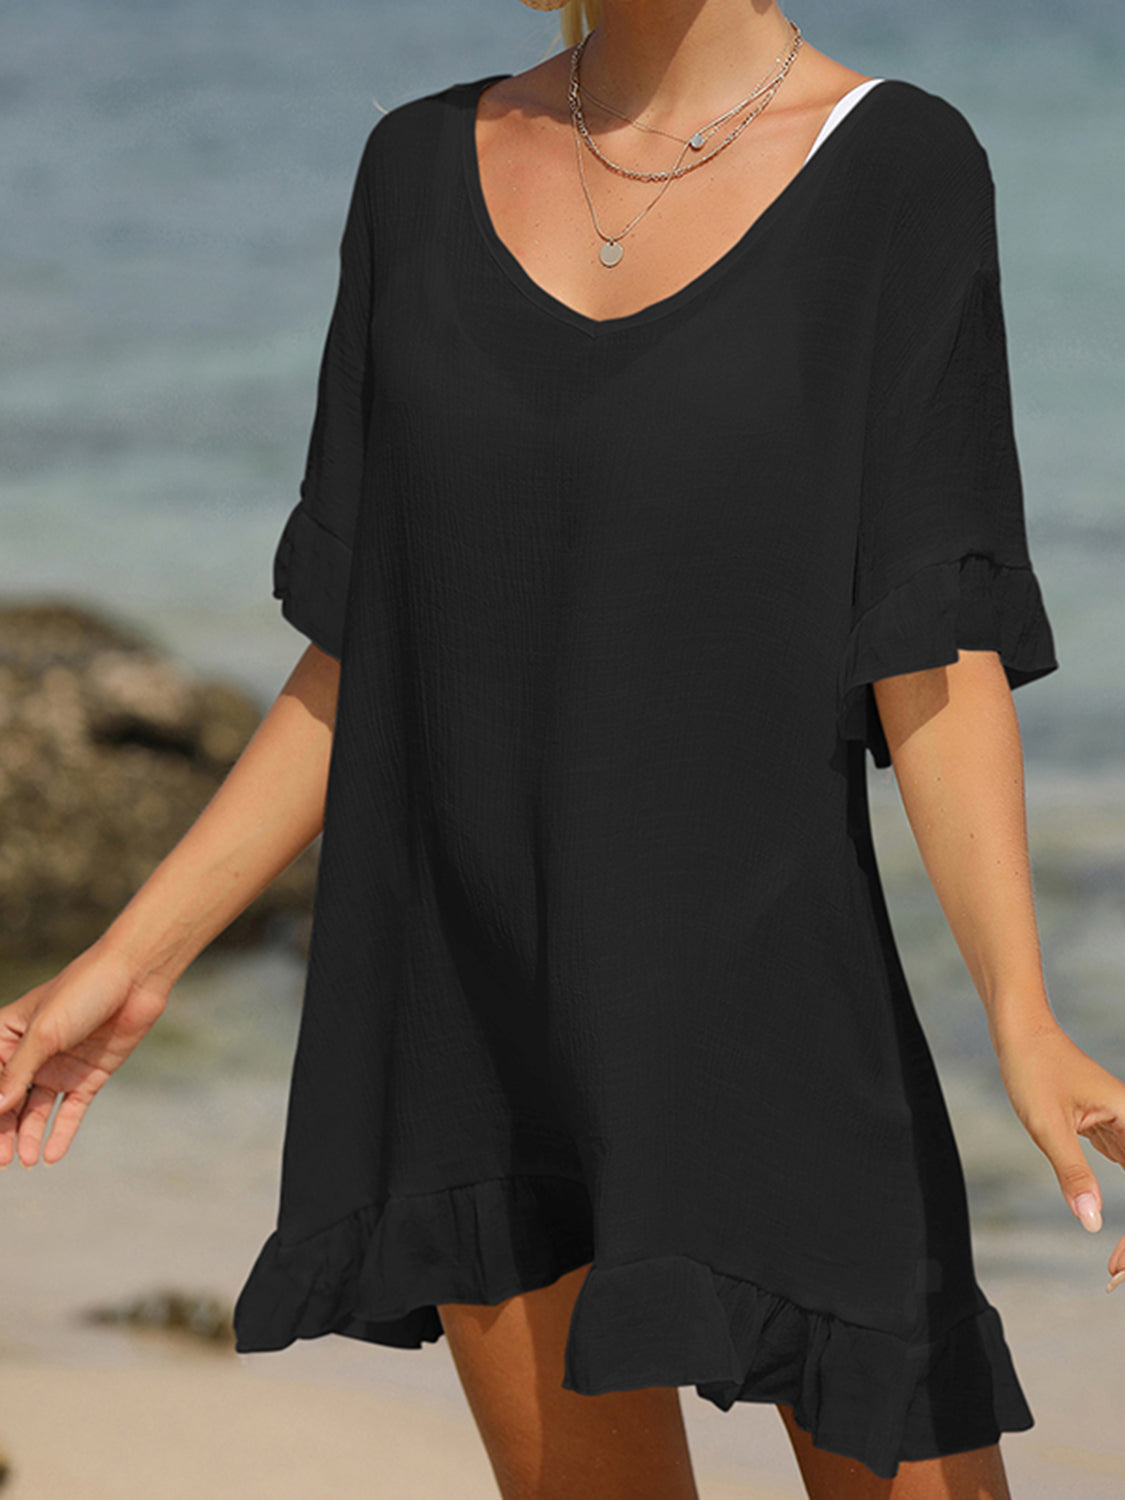 Tied Ruffled Half Sleeve Cover-Up Black One Size 